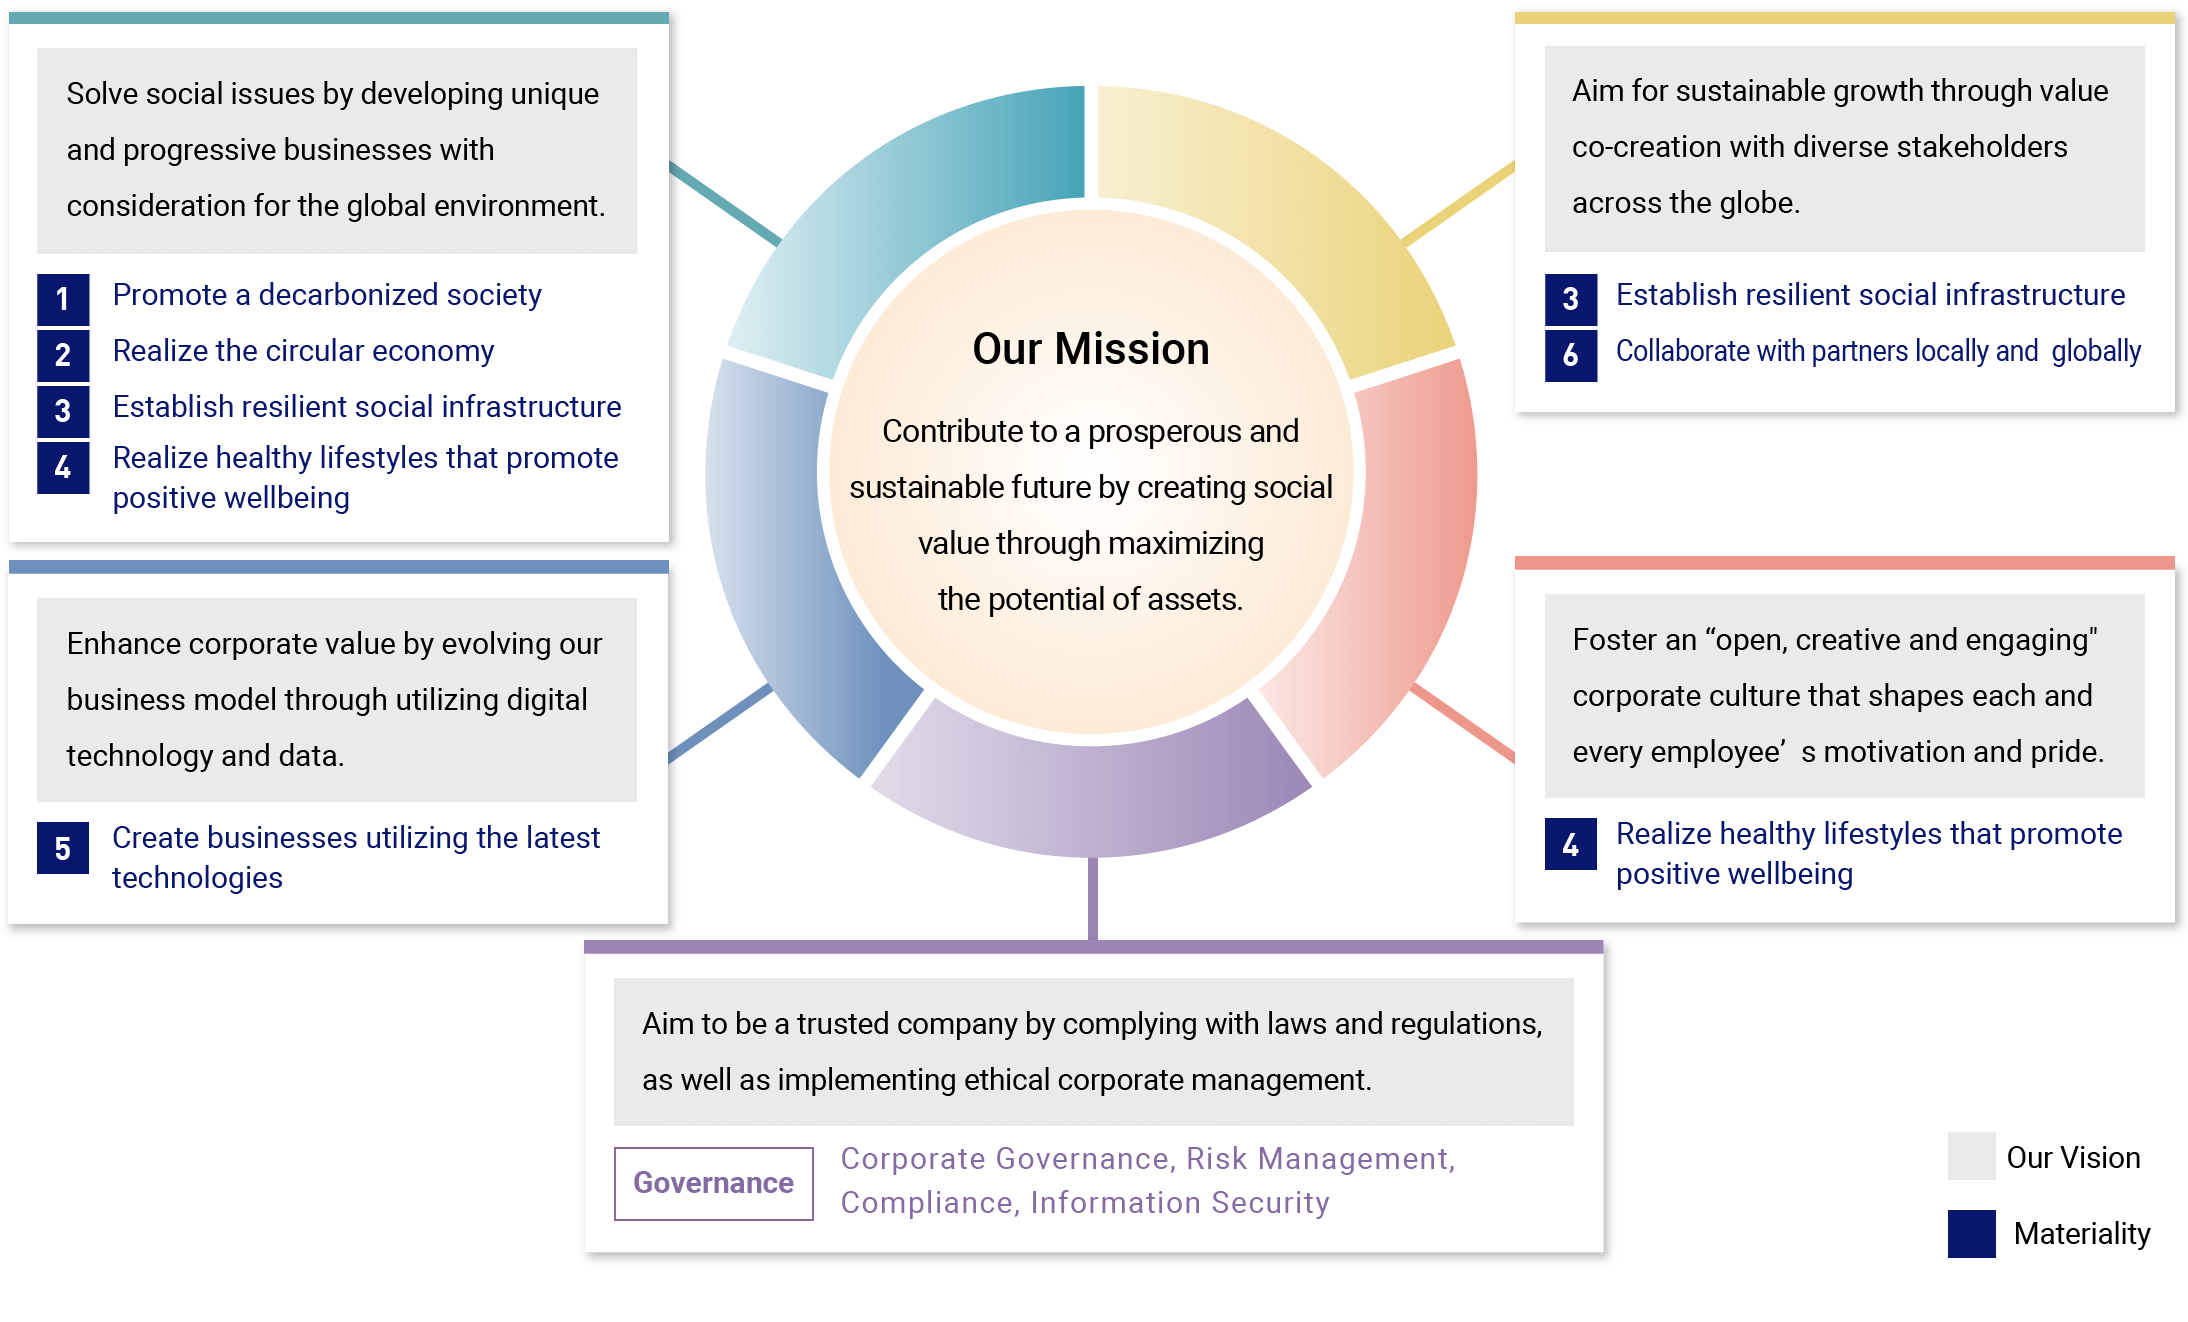 How Materiality Relate to "Our Mission" and "Our Vision"